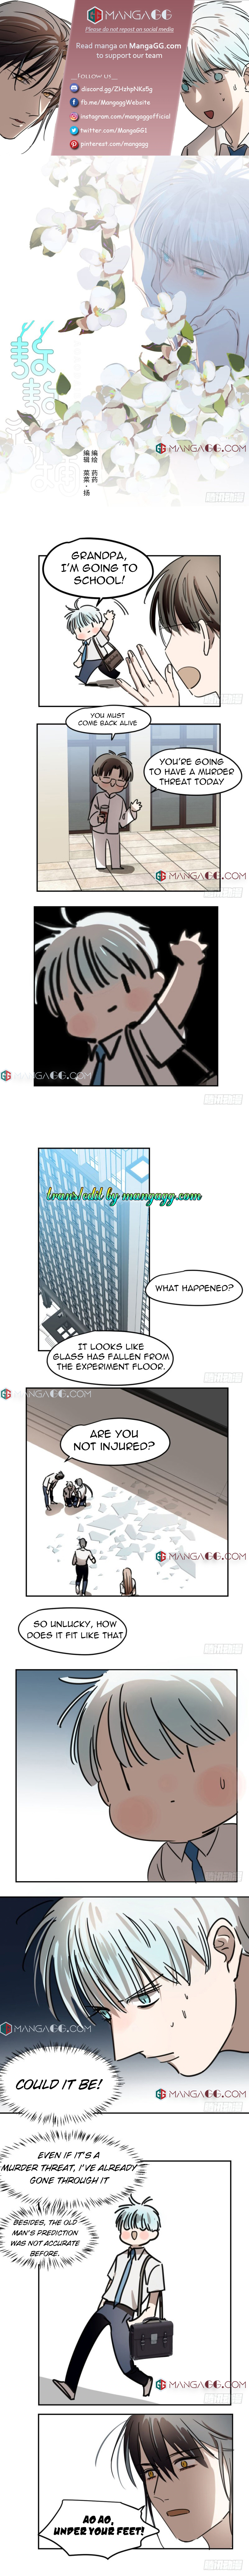 Chasing Ao Ao Chapter 6 - Page 0